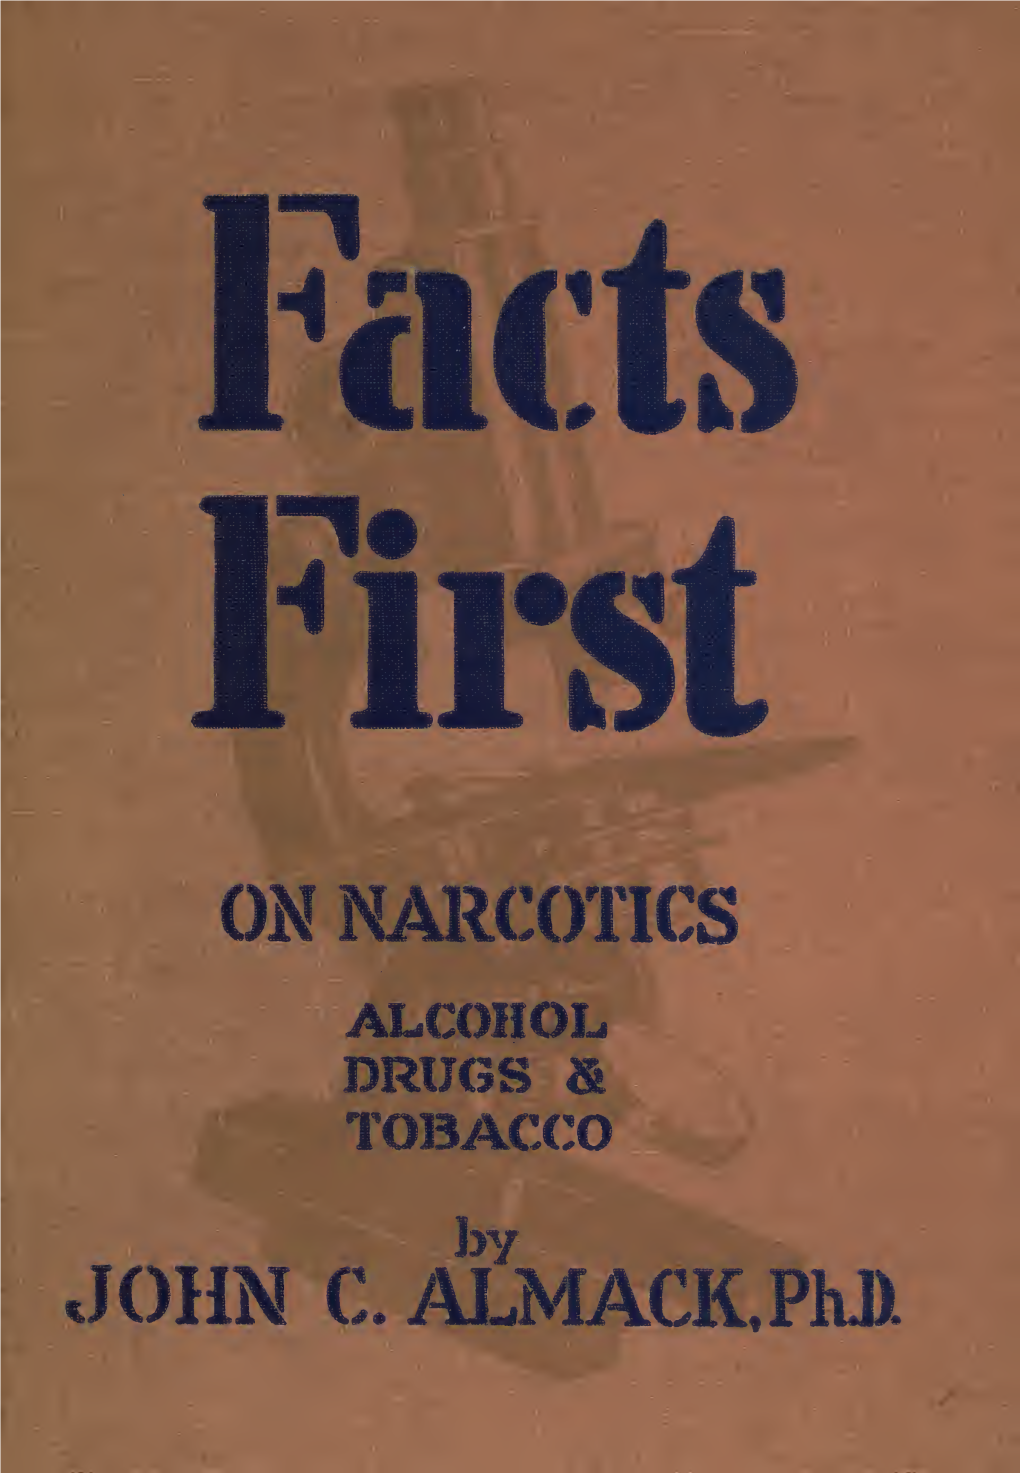 Facts First on Narcotics;